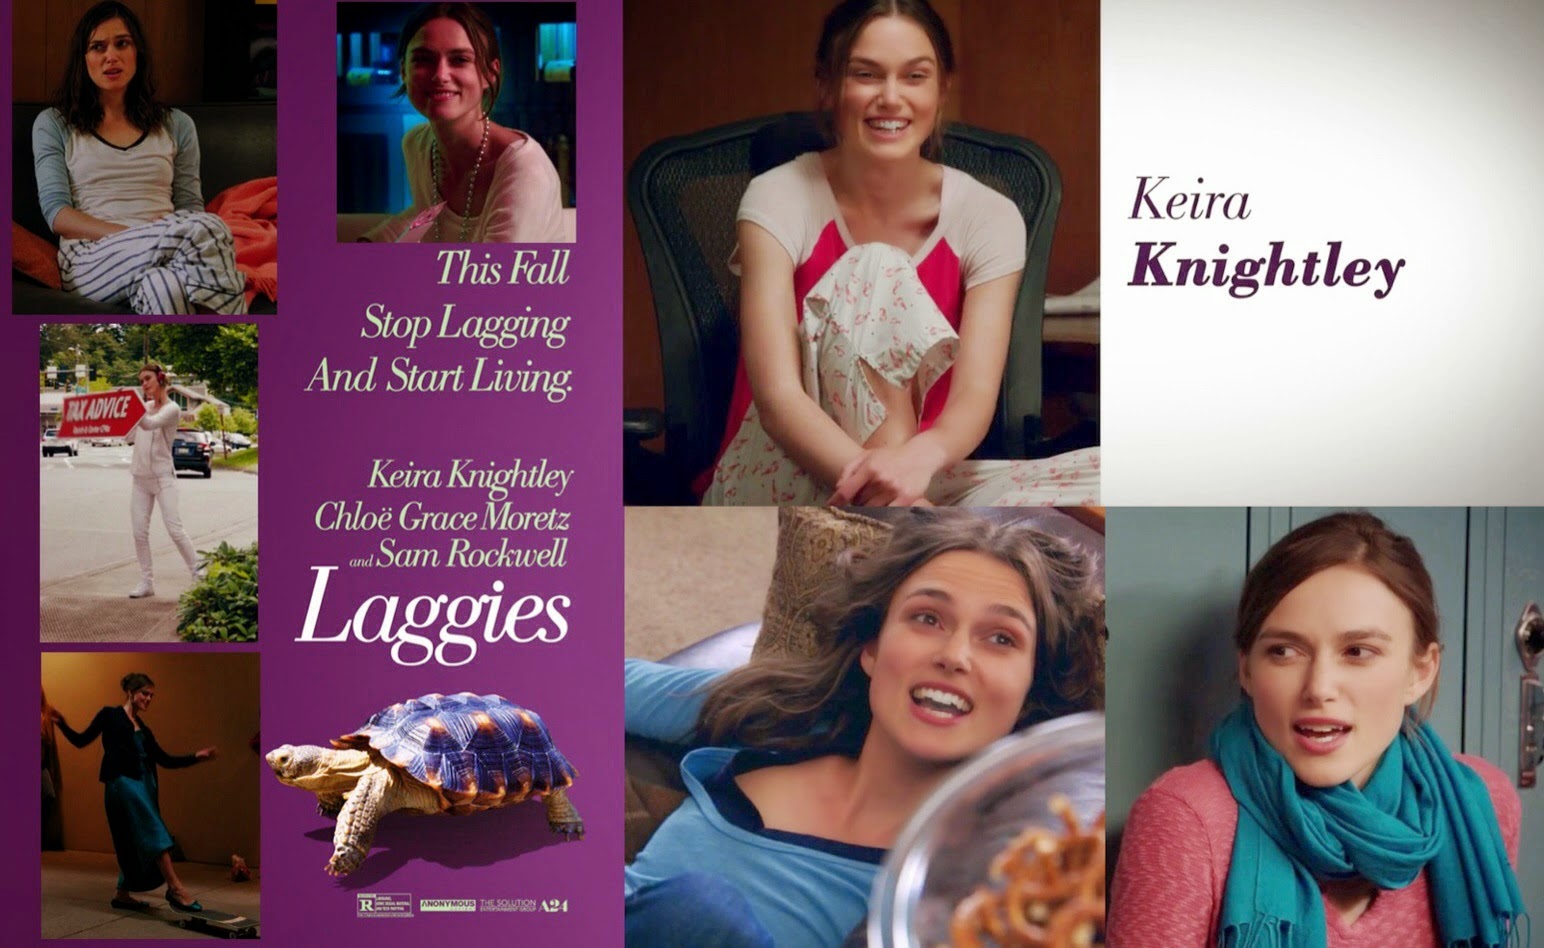 'laggies' 99 cent itunes movie of the week